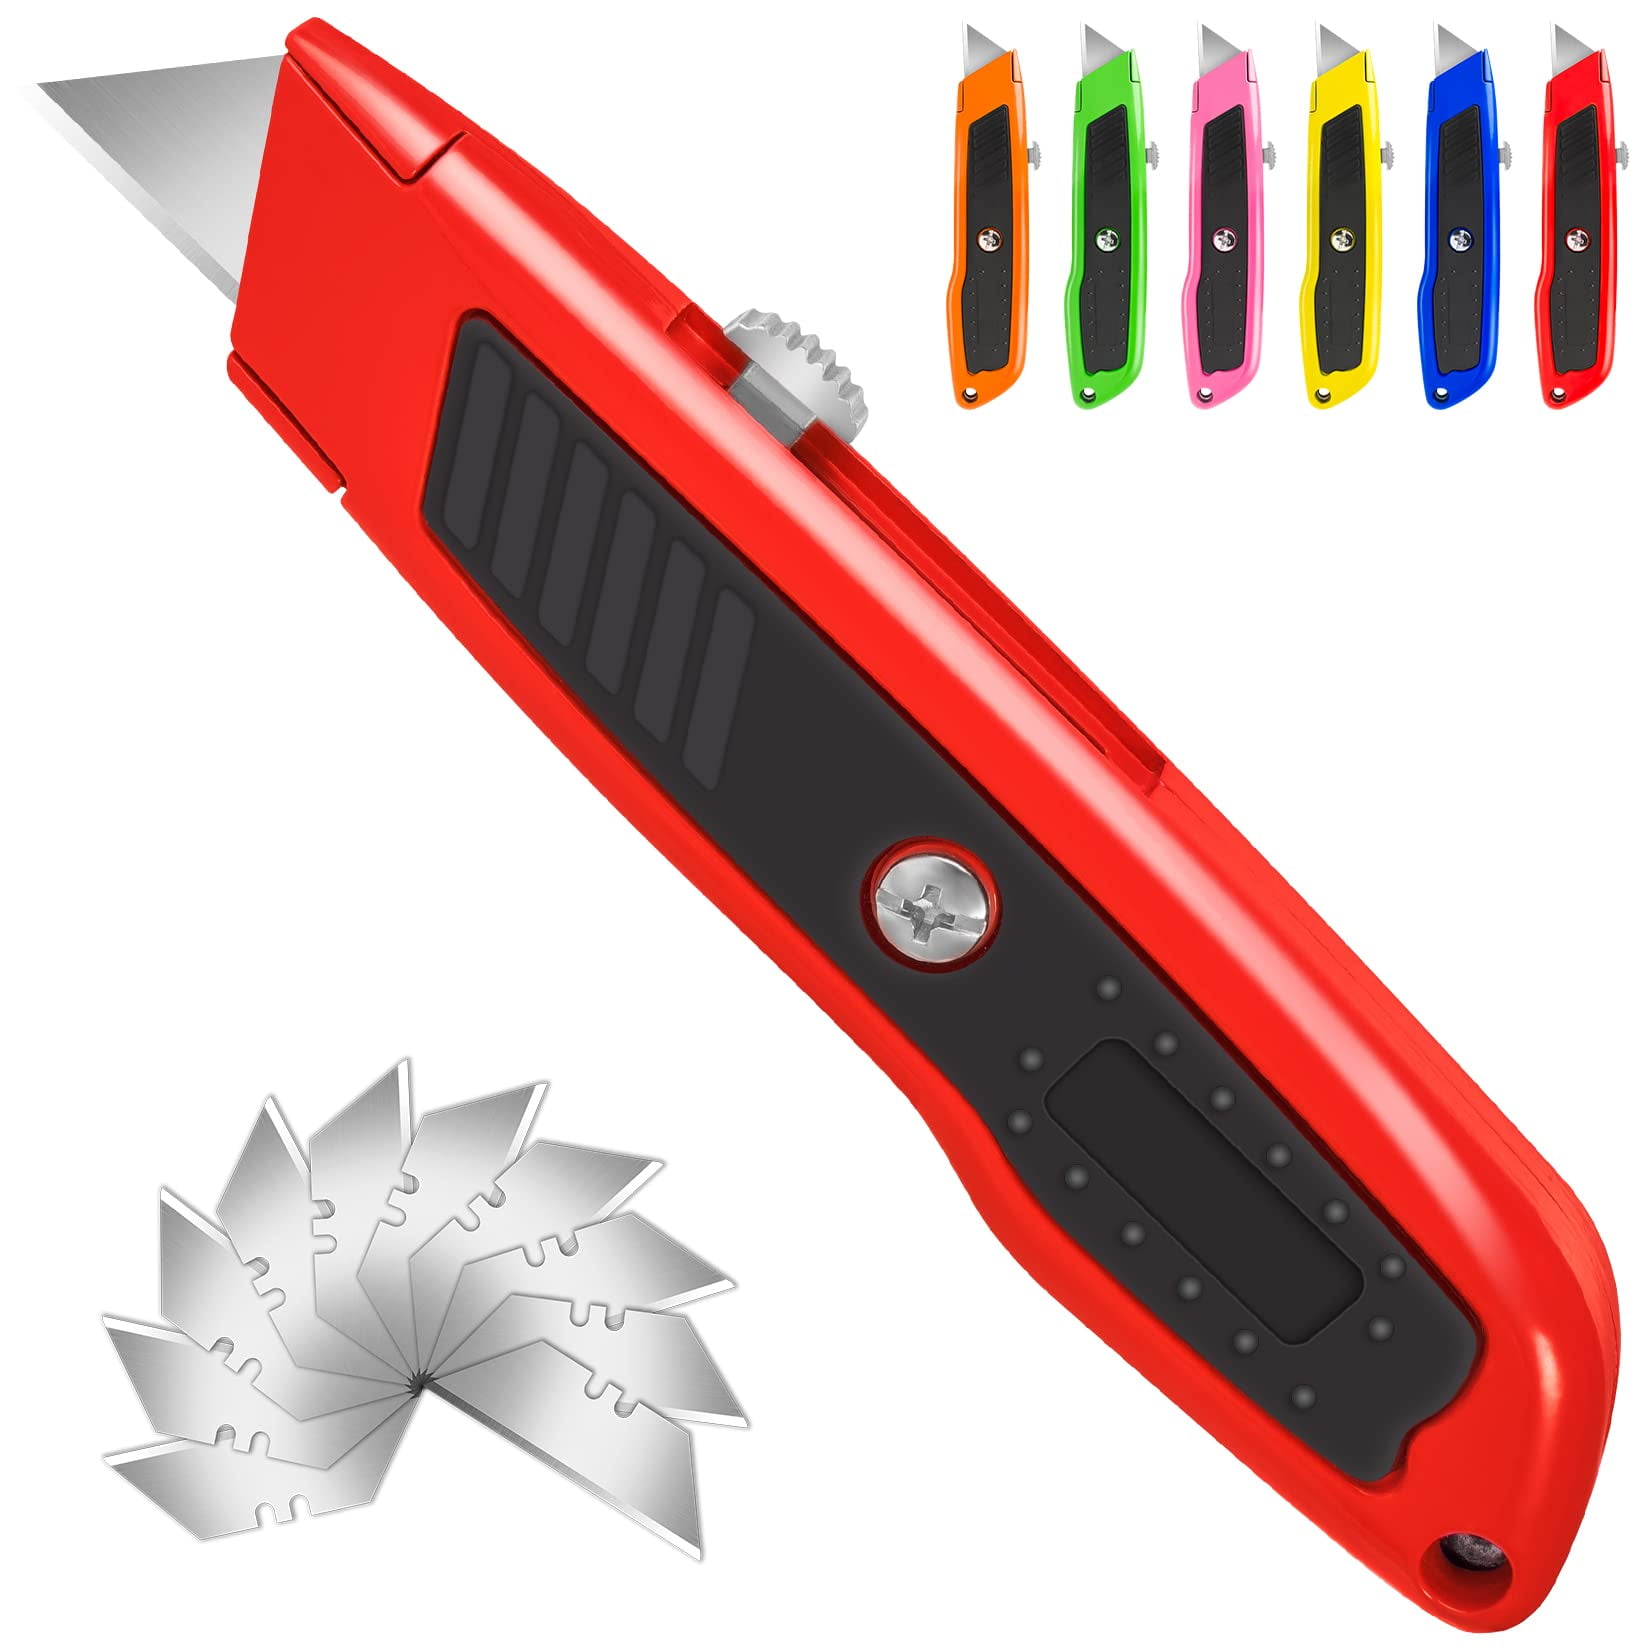 Inwell Retractable Utility Knife Set, Heavy Duty Box Cutter With 6pcs SK5  Blades, 40 Degree Angle Designed, Premium Utility Knife for Carpet